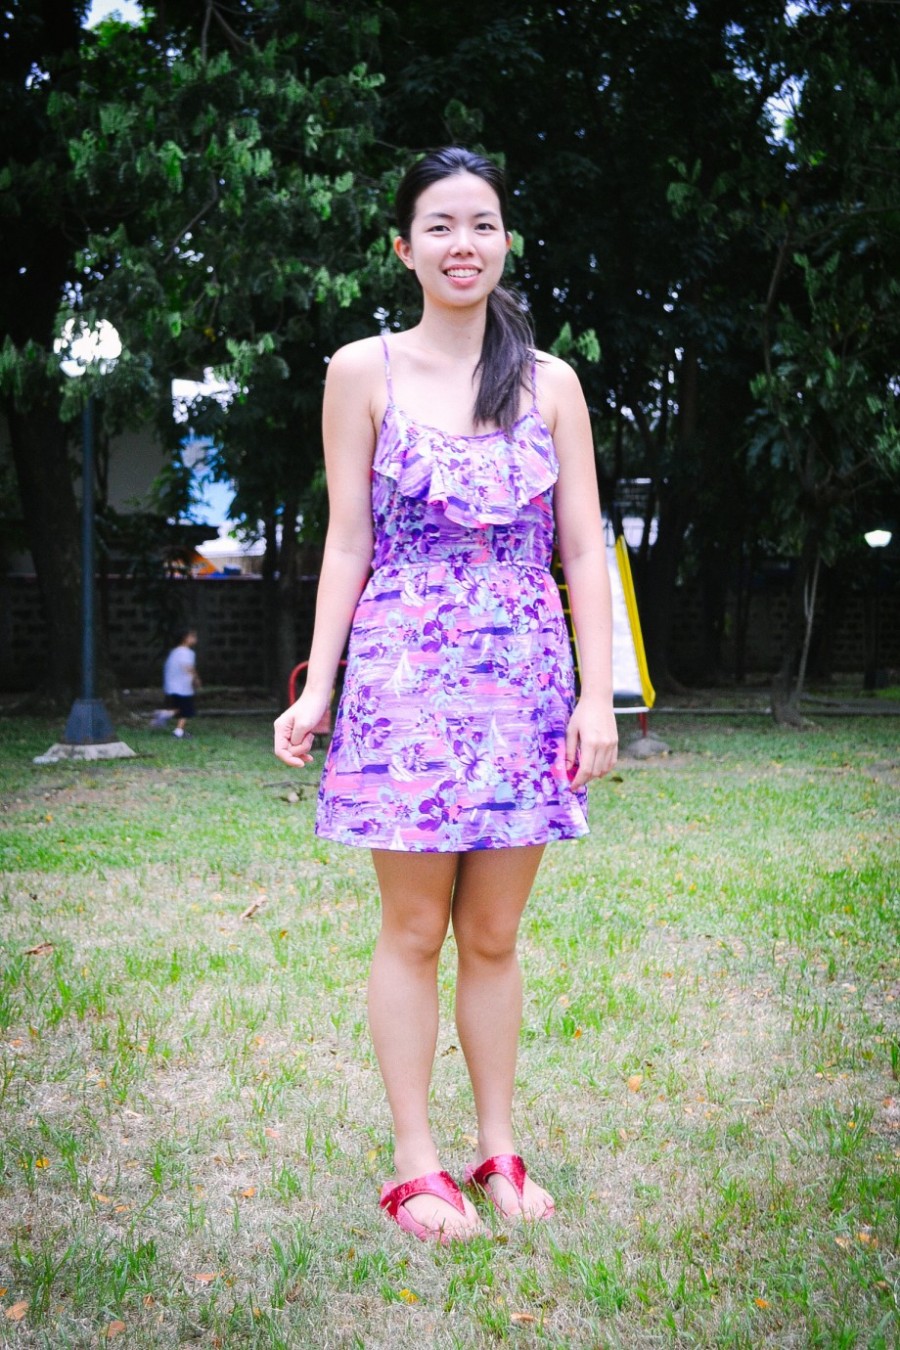 Unlike the rest of the pack, Nina Co threw on a flirty dress from Forever 21 with comfy Fitflops.